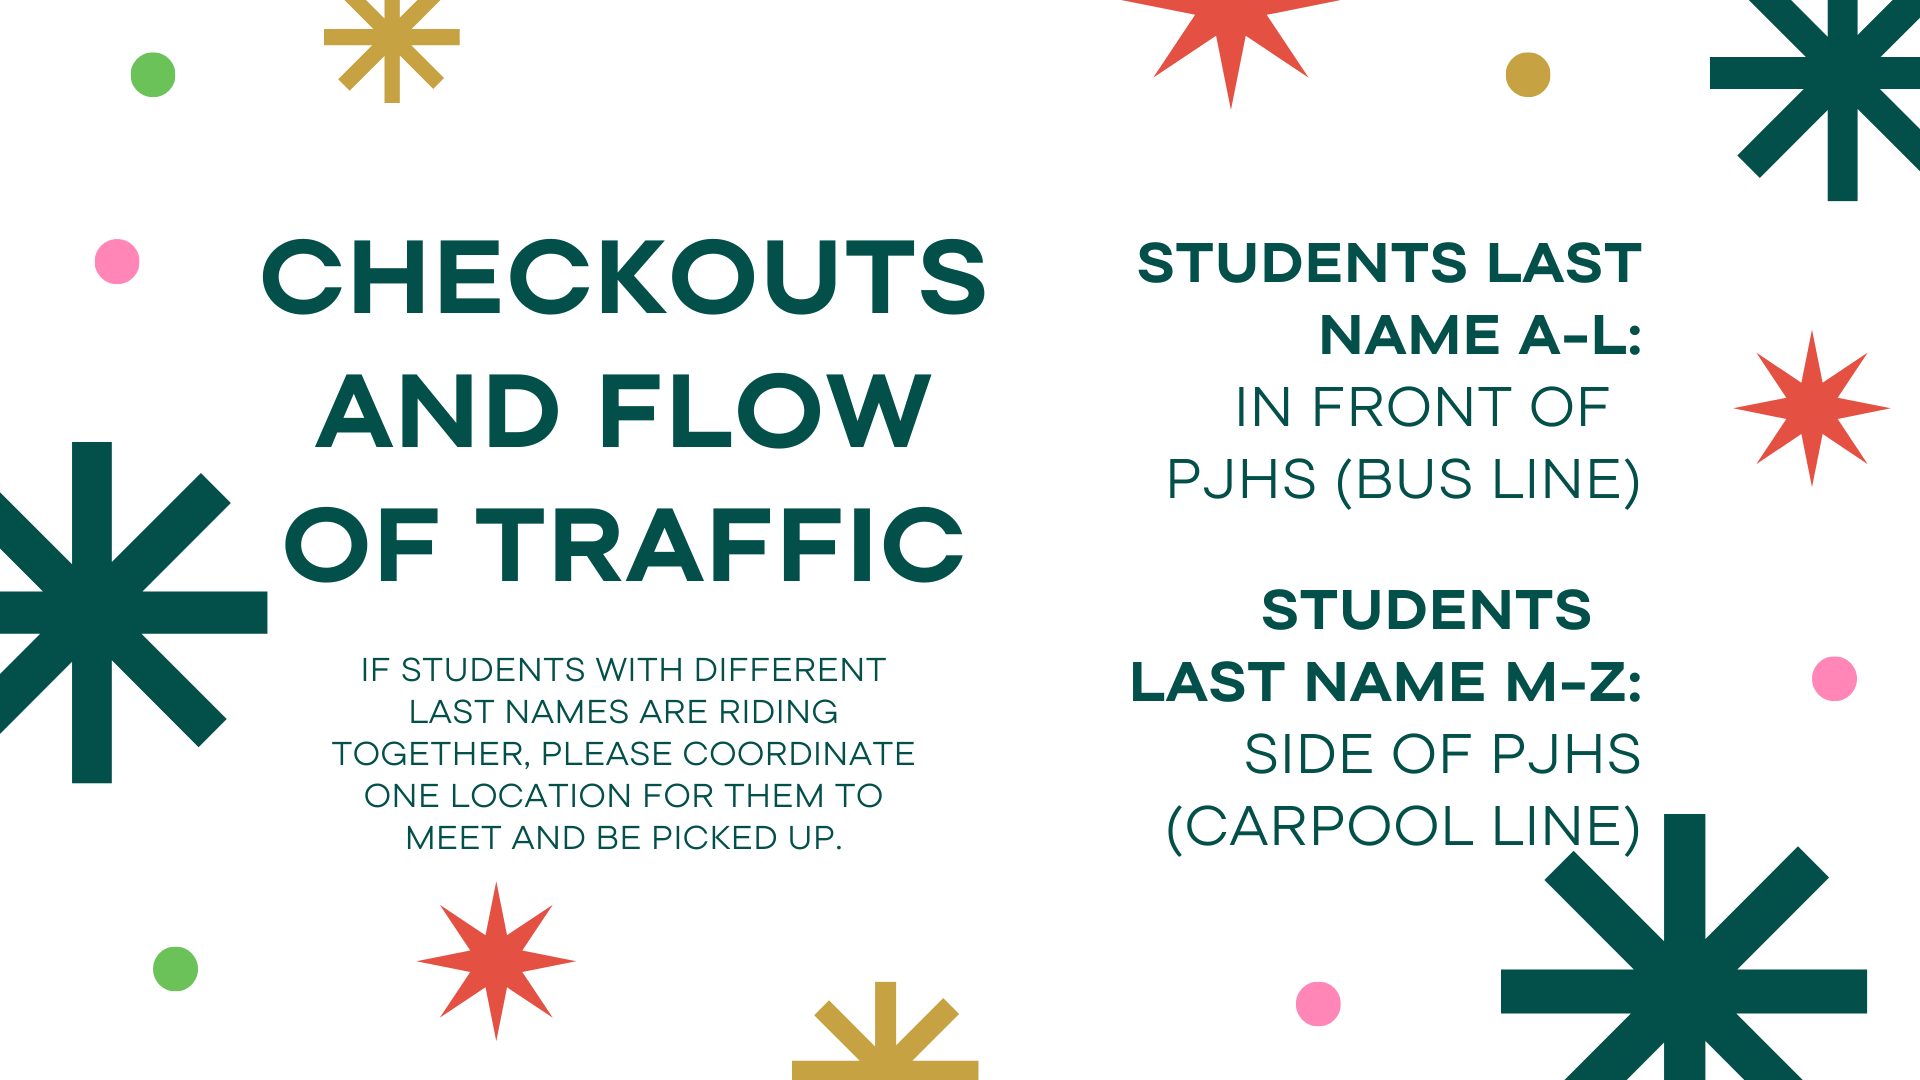 Checkouts and Flow of Traffic IF students with different last names are riding together, please coordinate one location for them to meet and be picked up.Students LAst Name A-L: In front Of  PJHS (Bus line)Students   LAst Name M-Z: Side of PJHS (Carpool Line)